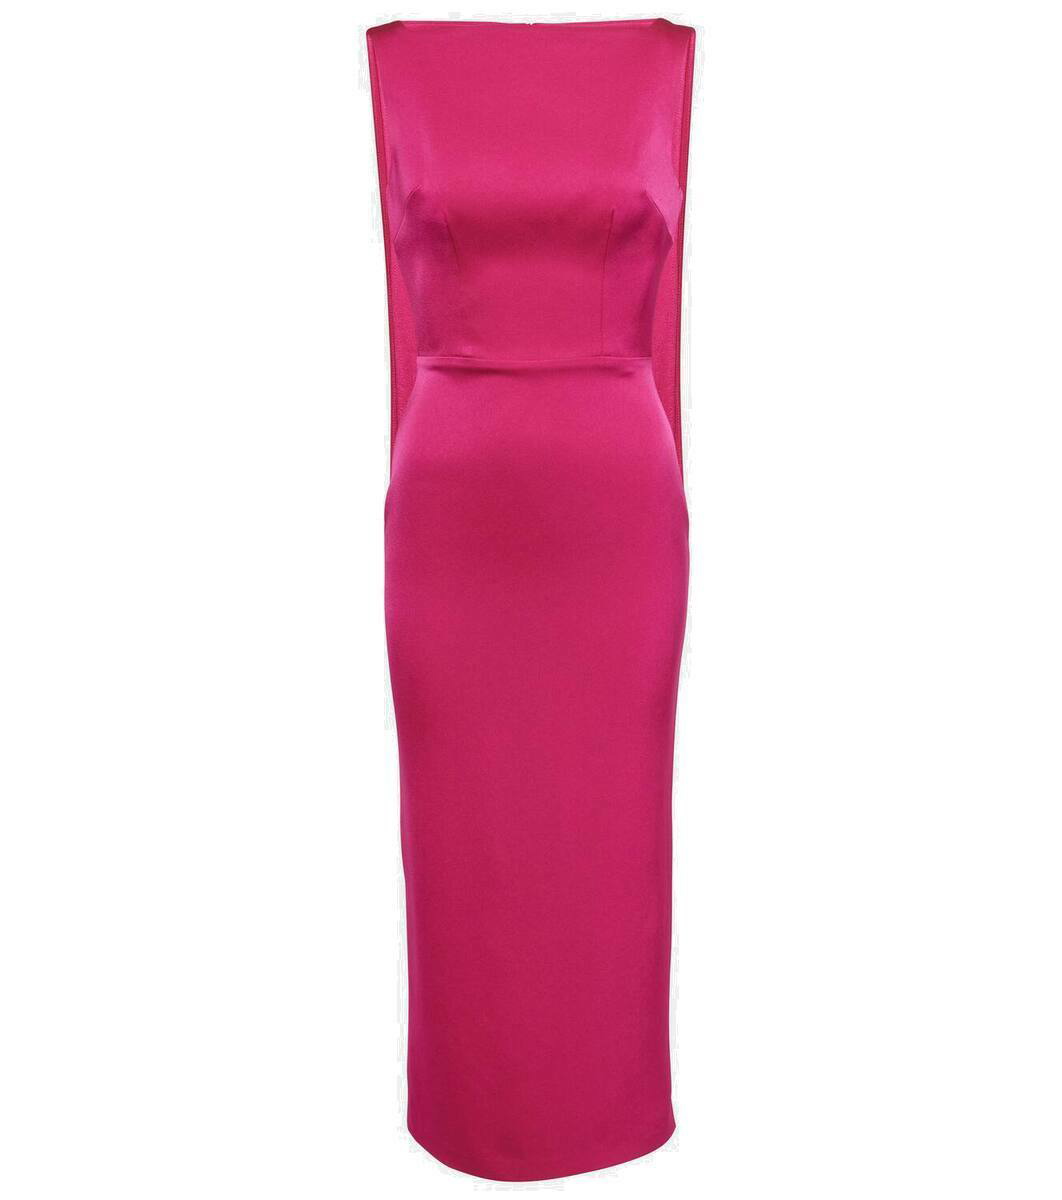 Leighton high-rise leggings in pink - Alex Perry